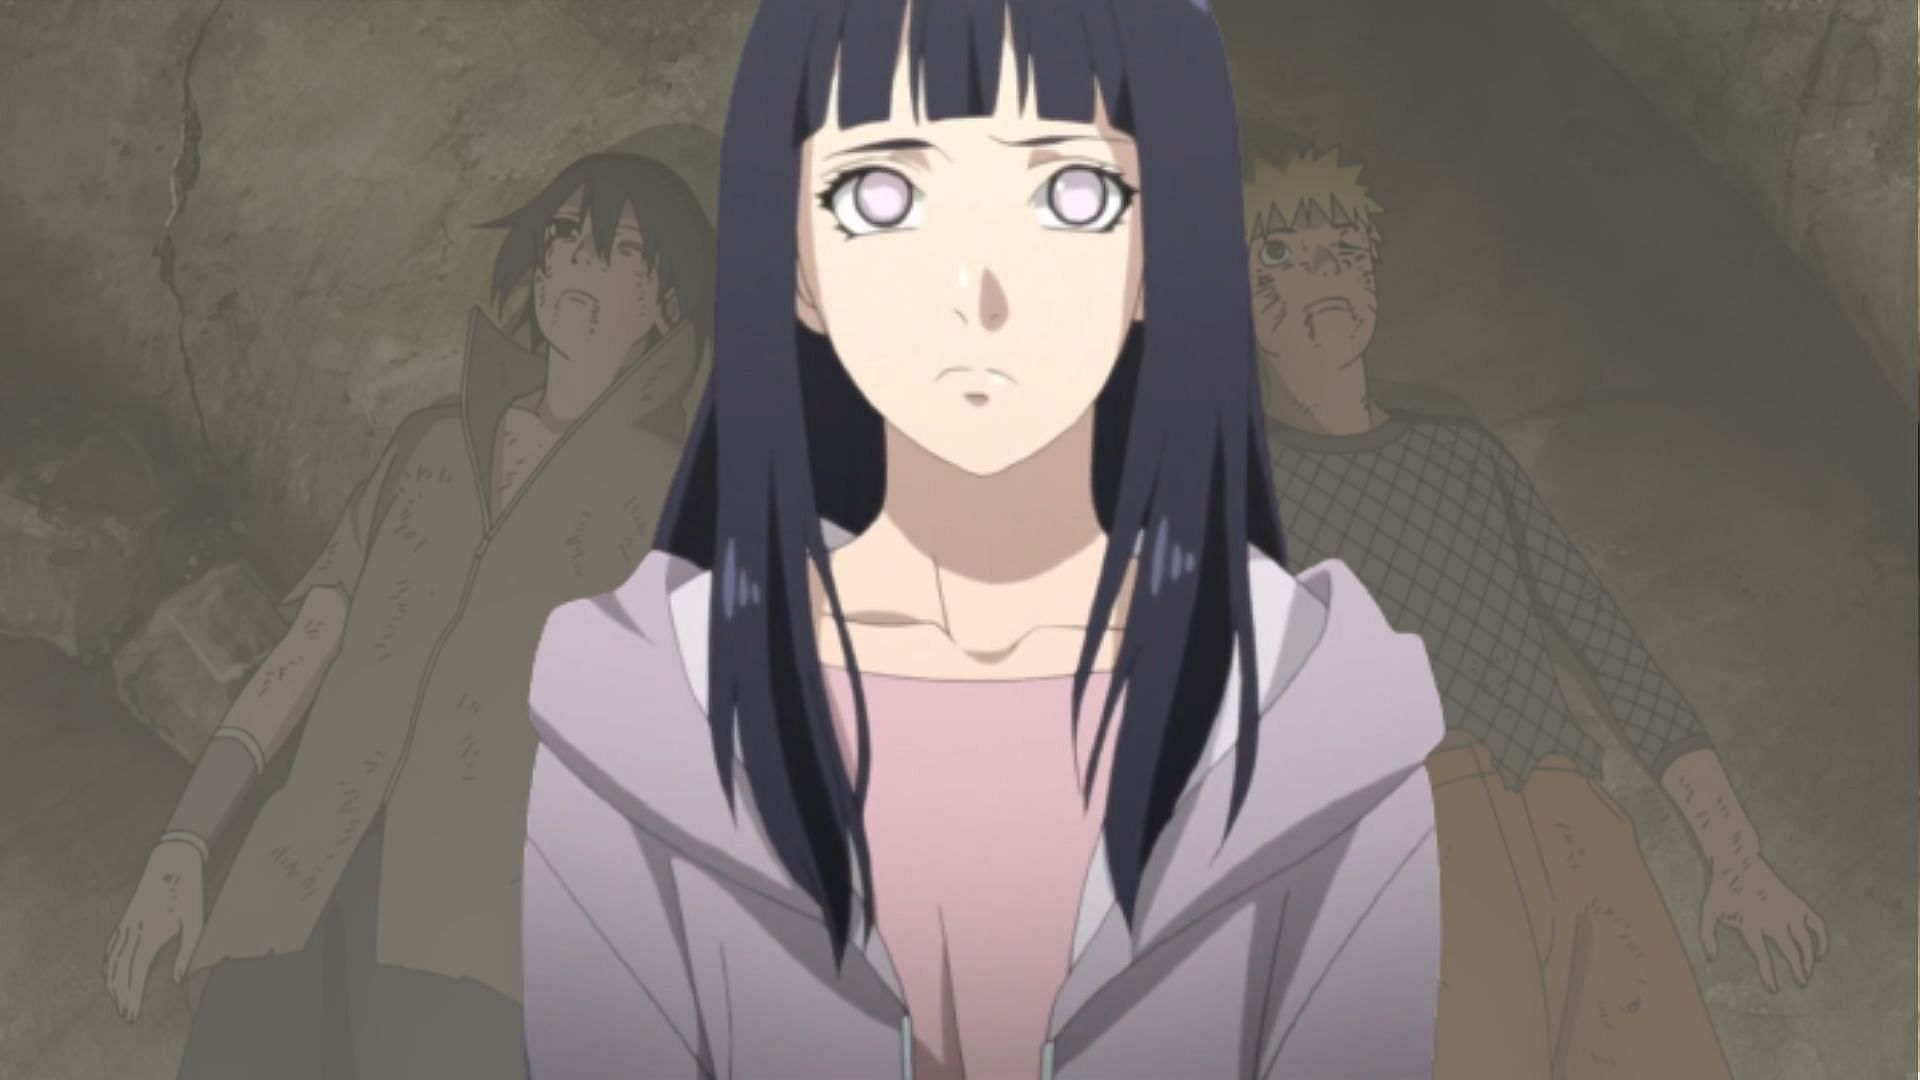 A remake without fillers could be bad news for Hinata fans (Image via Studio Pierrot)